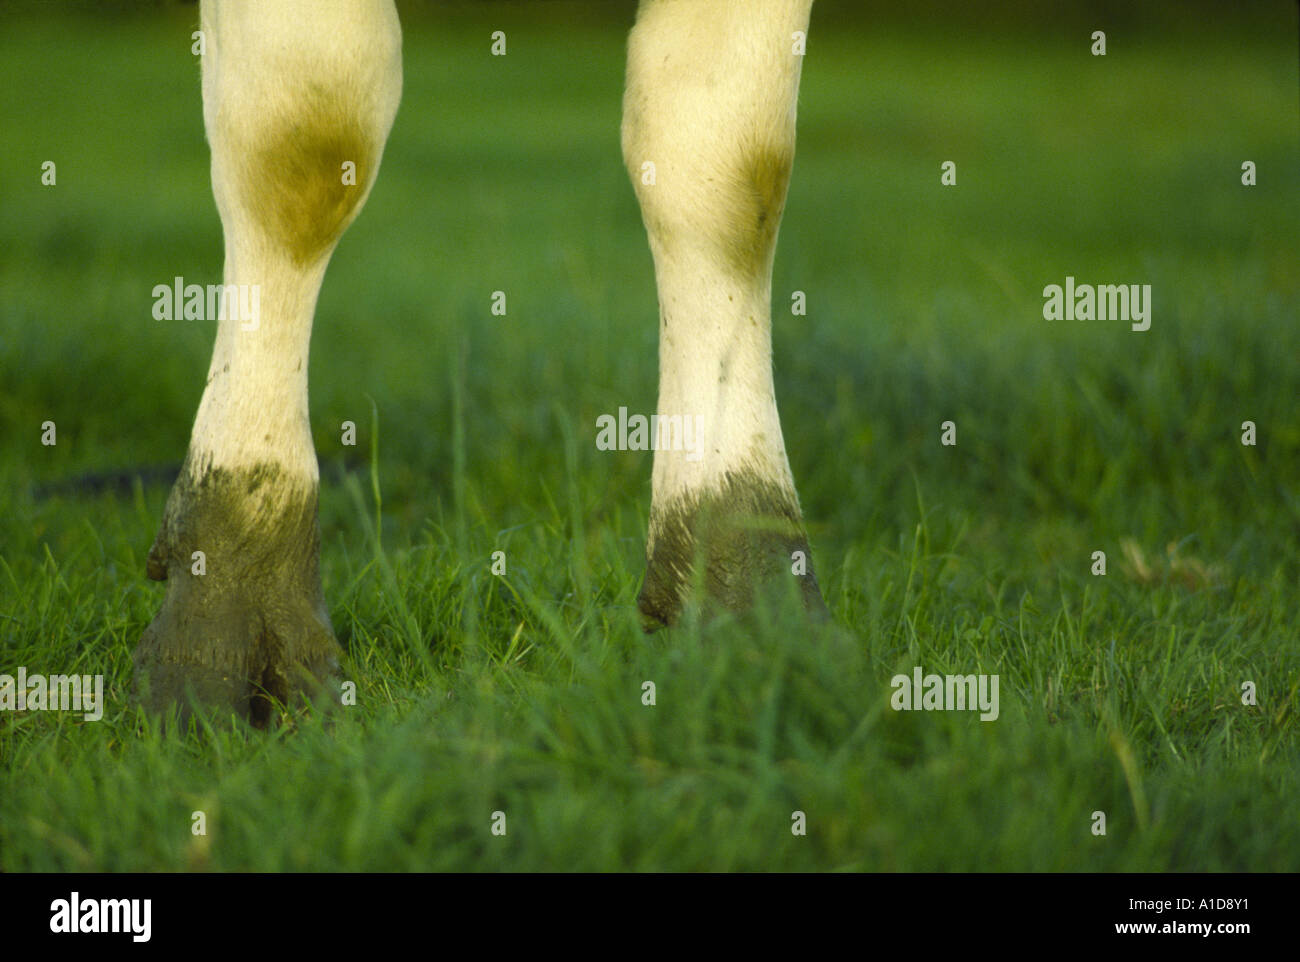 Holstein Friesian Dairy Cows Fore Legs and Muddy Feet in a Field of Grass in County Kilkenny Ireland Stock Photo